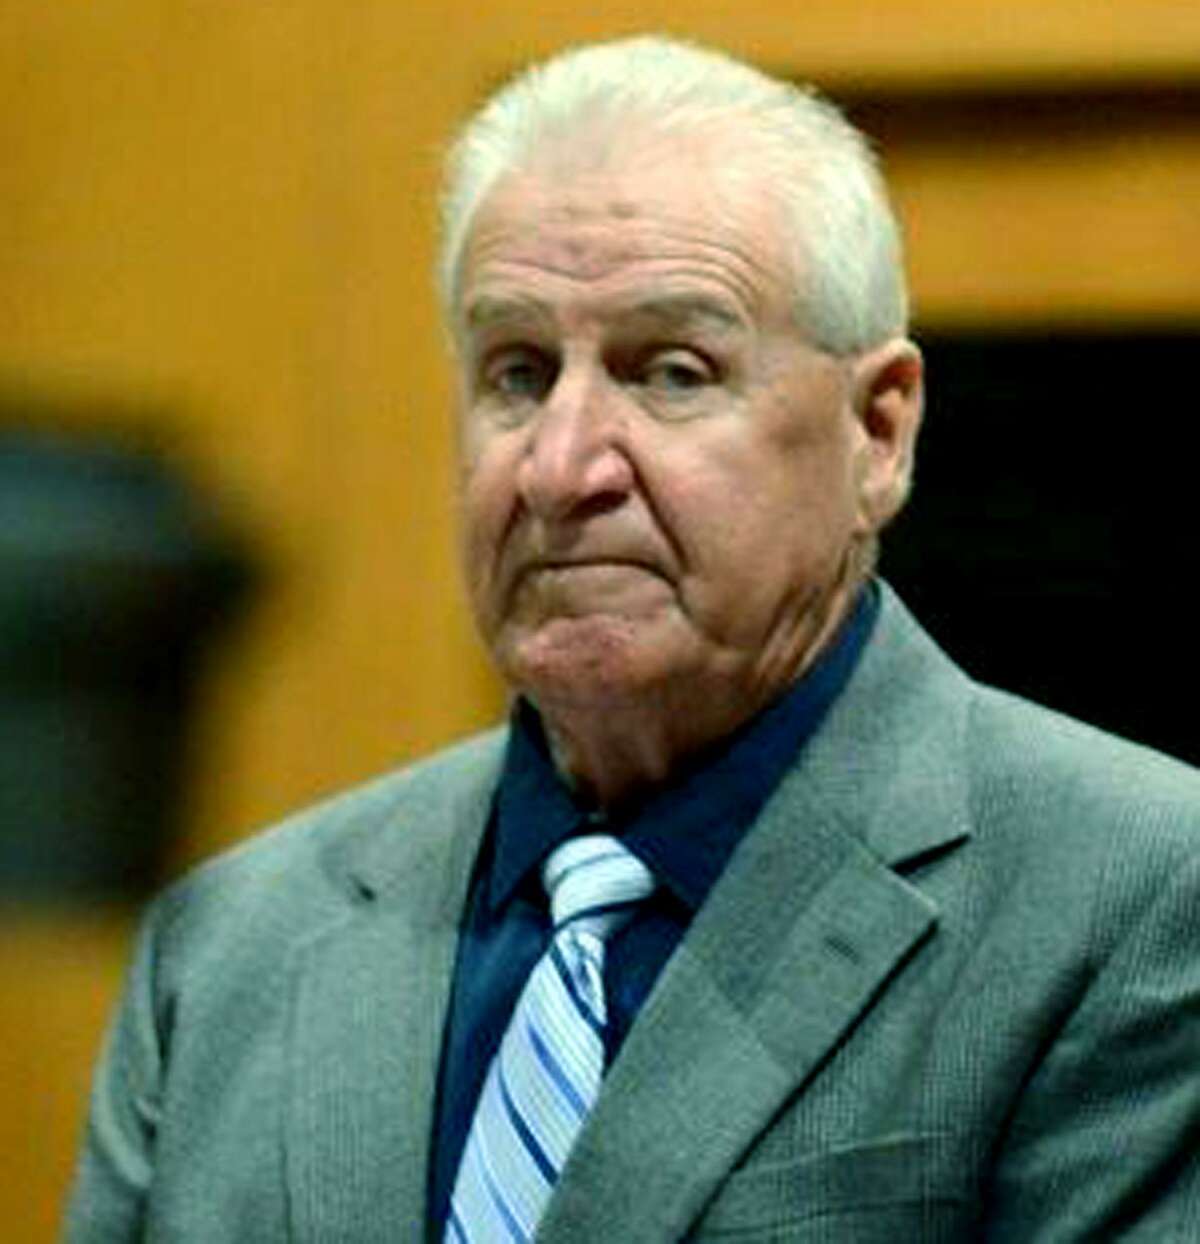 A jury convicted Dominic Badaracco last week of trying to bribe a judge to influence a grand jury probe in the case of the disappearance of his ex-wife, Mary Badaracco. July 2013 Photo by Autumn Driscoll